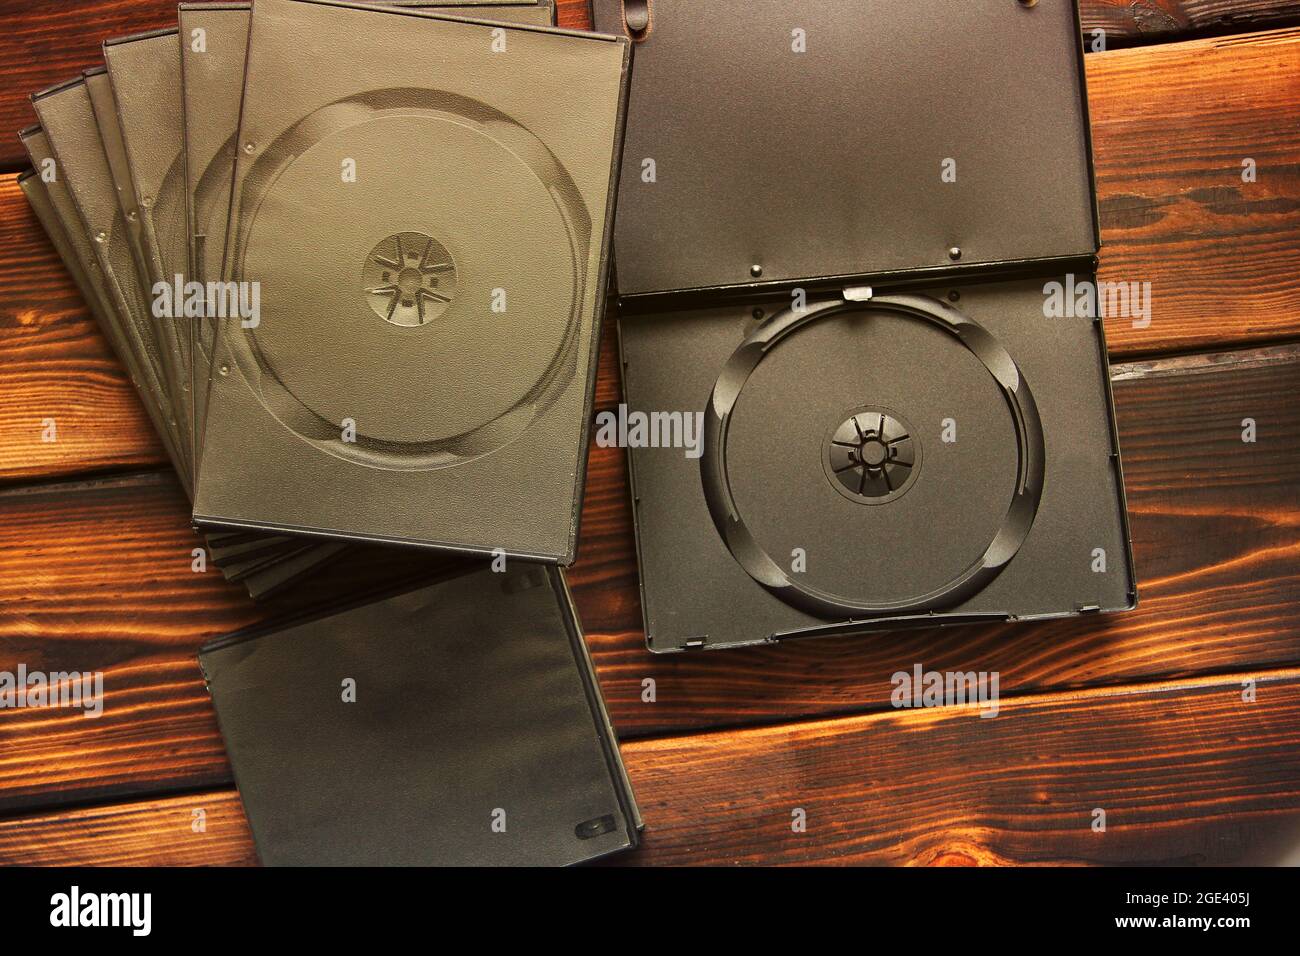 Boxes for CD drives on a wooden background Stock Photo